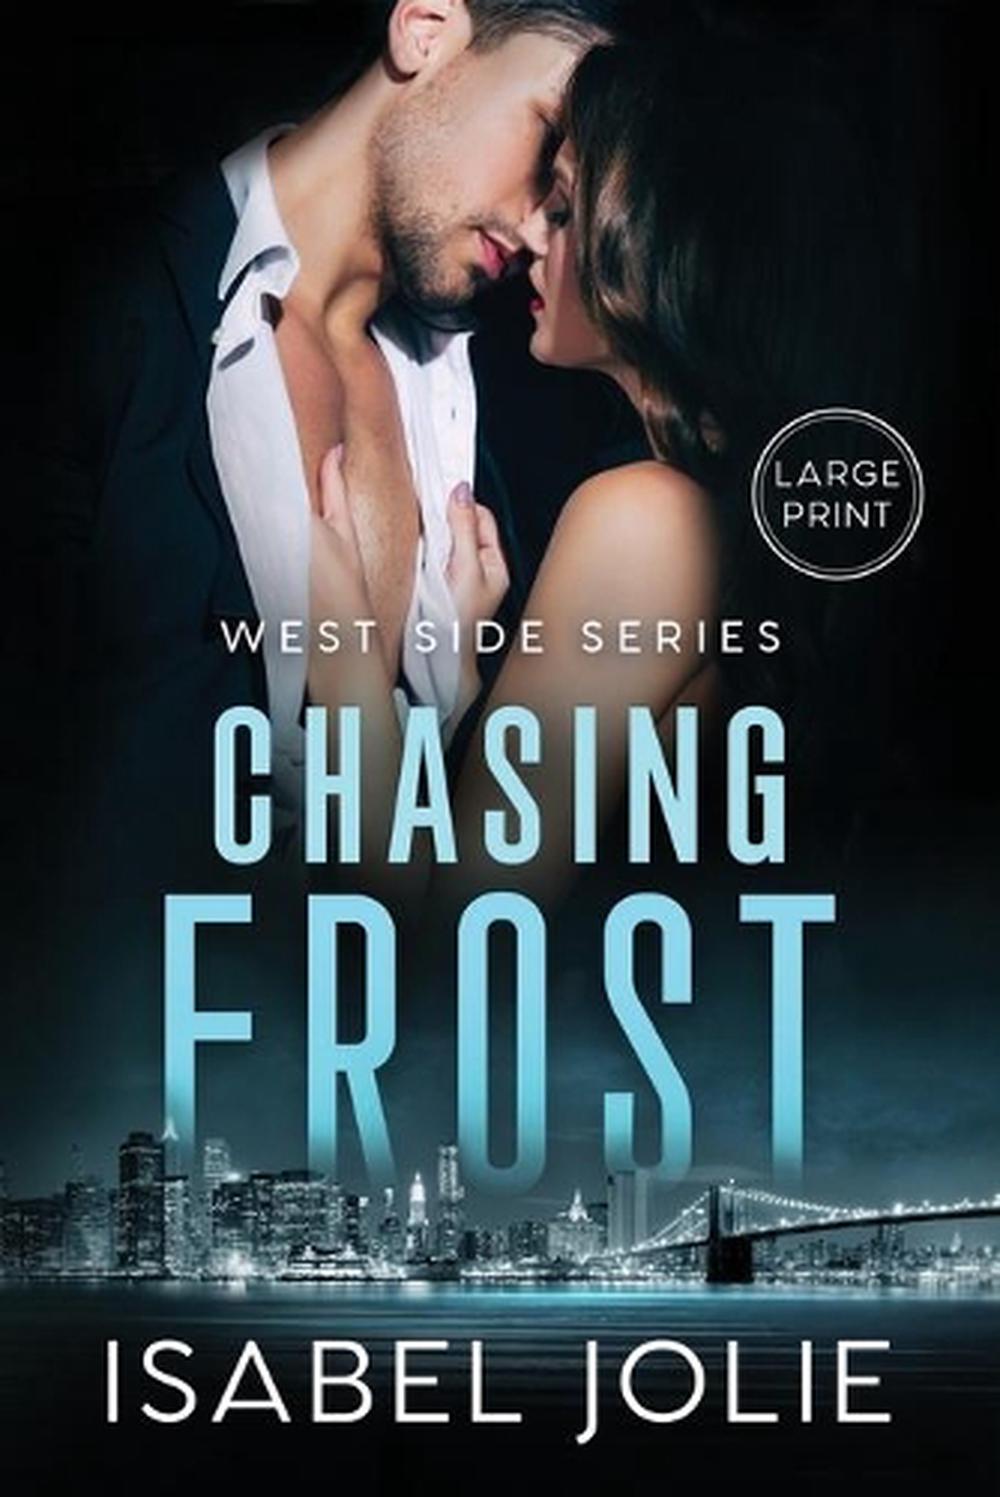 Chasing Frost An Enemies To Lovers Fbi Romance By Isabel Jolie 